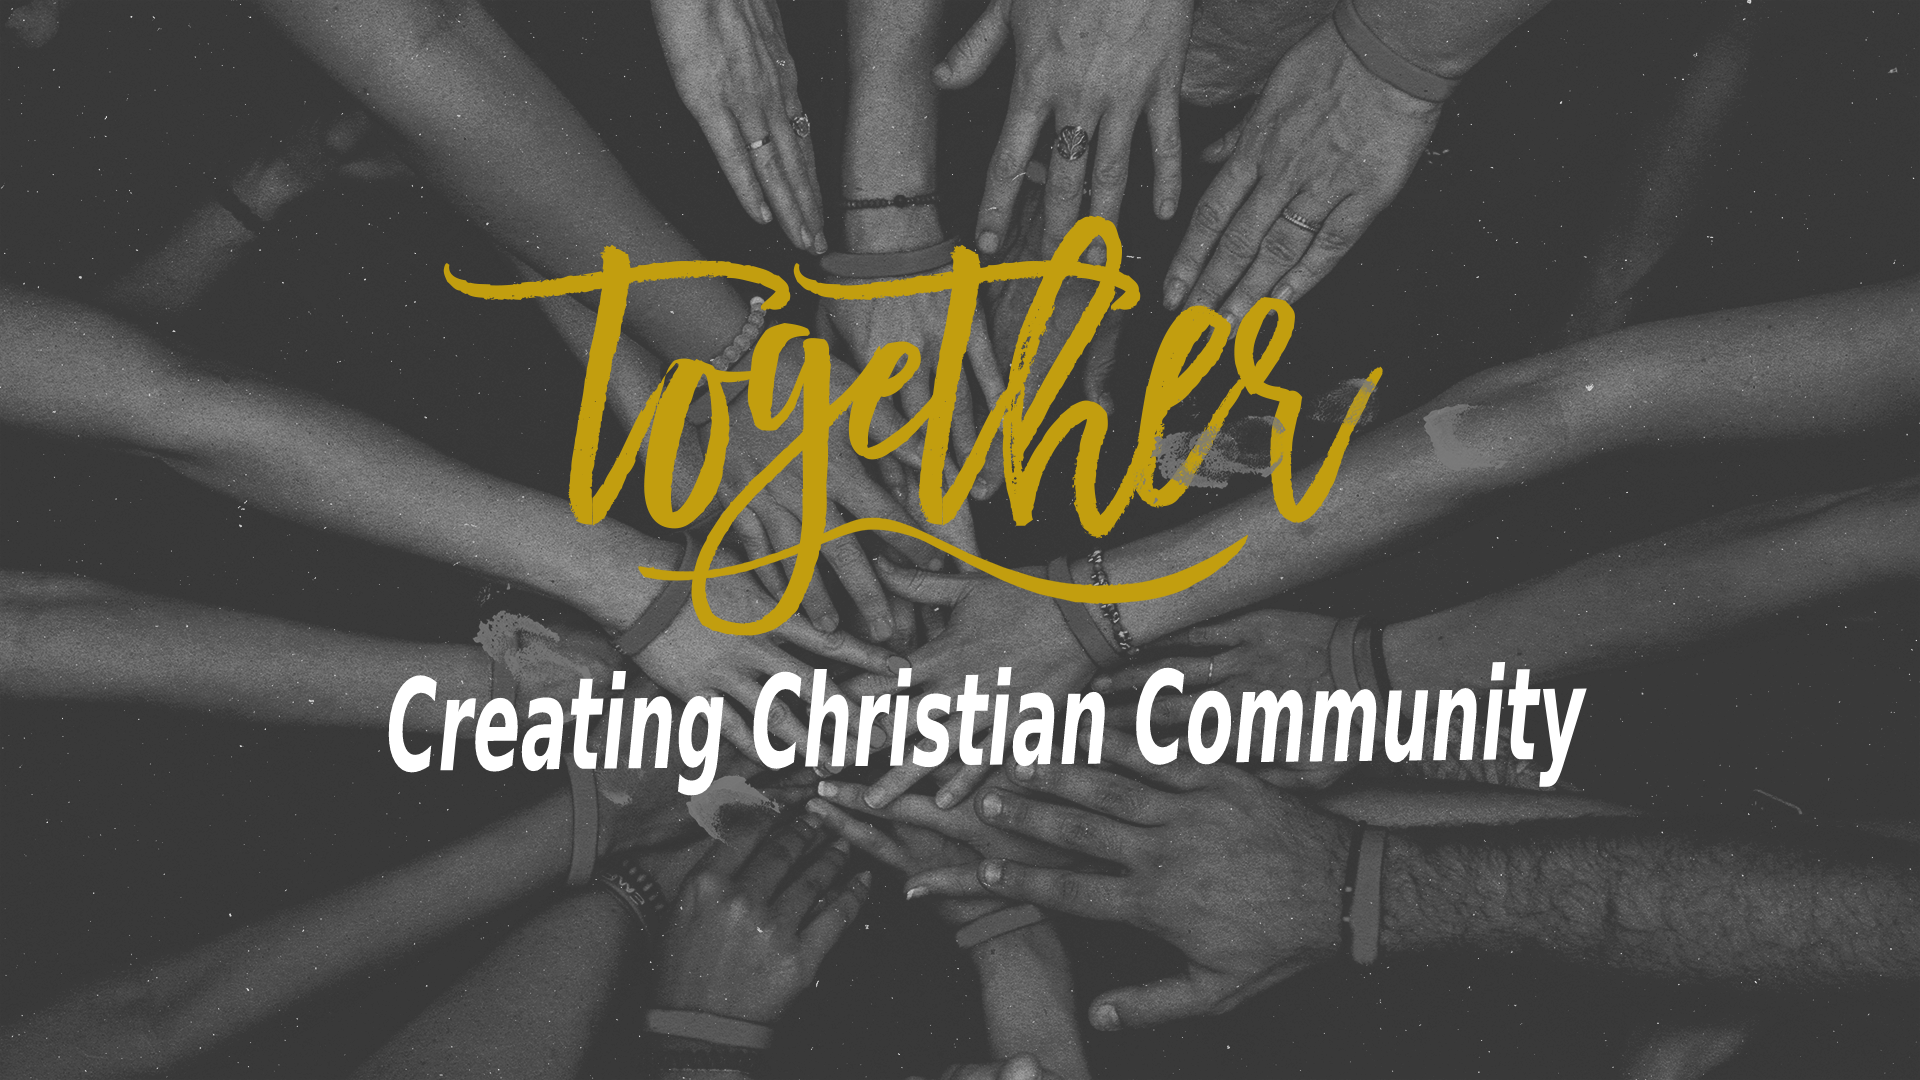 Together: To Join God's Mission in Everyday Life